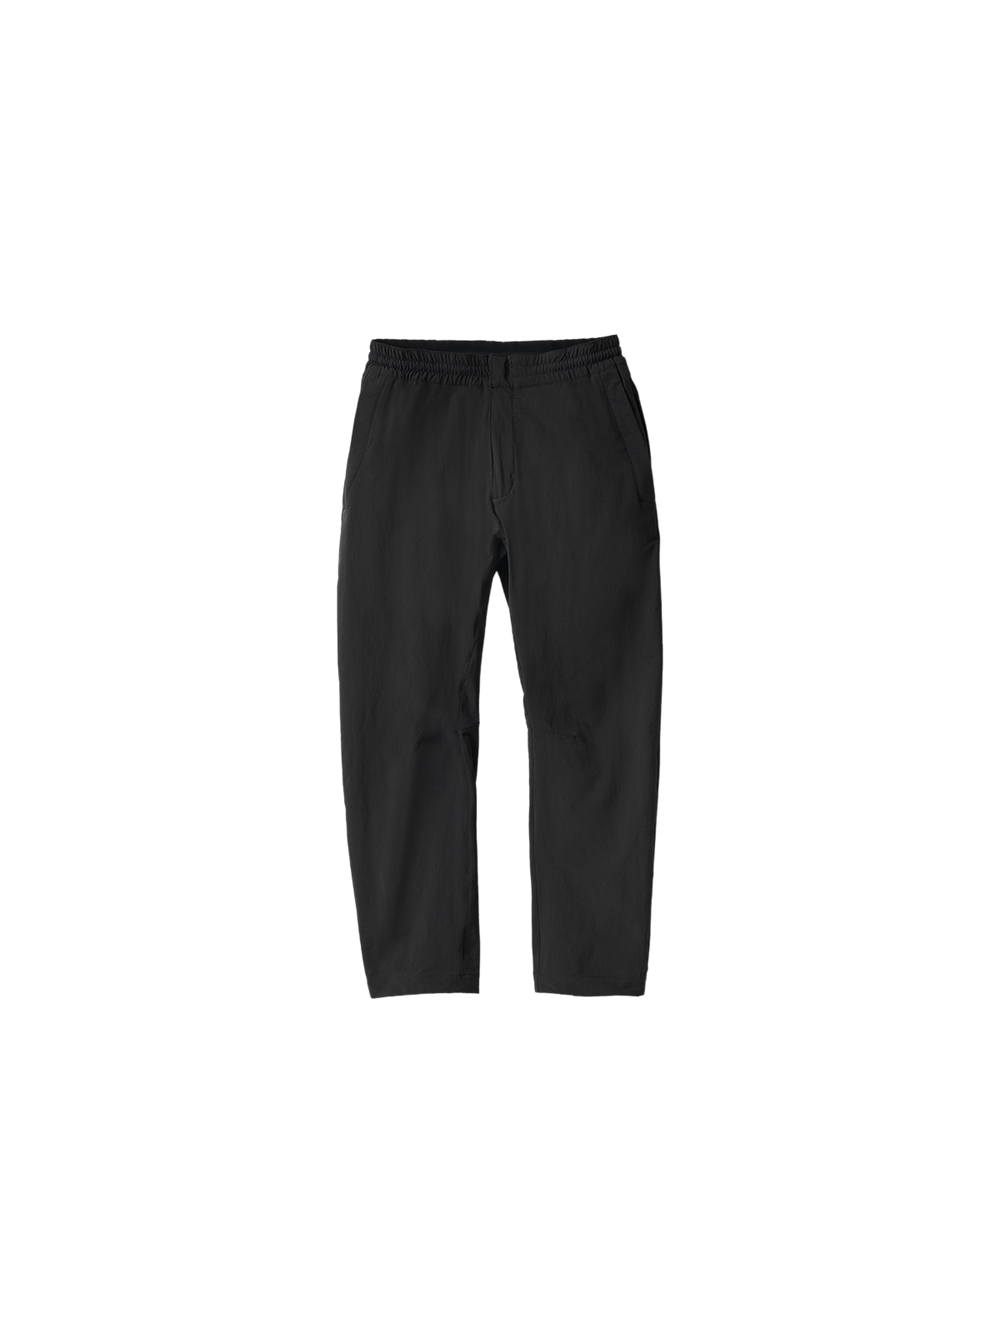 Product Image for Motion Pant 2.0